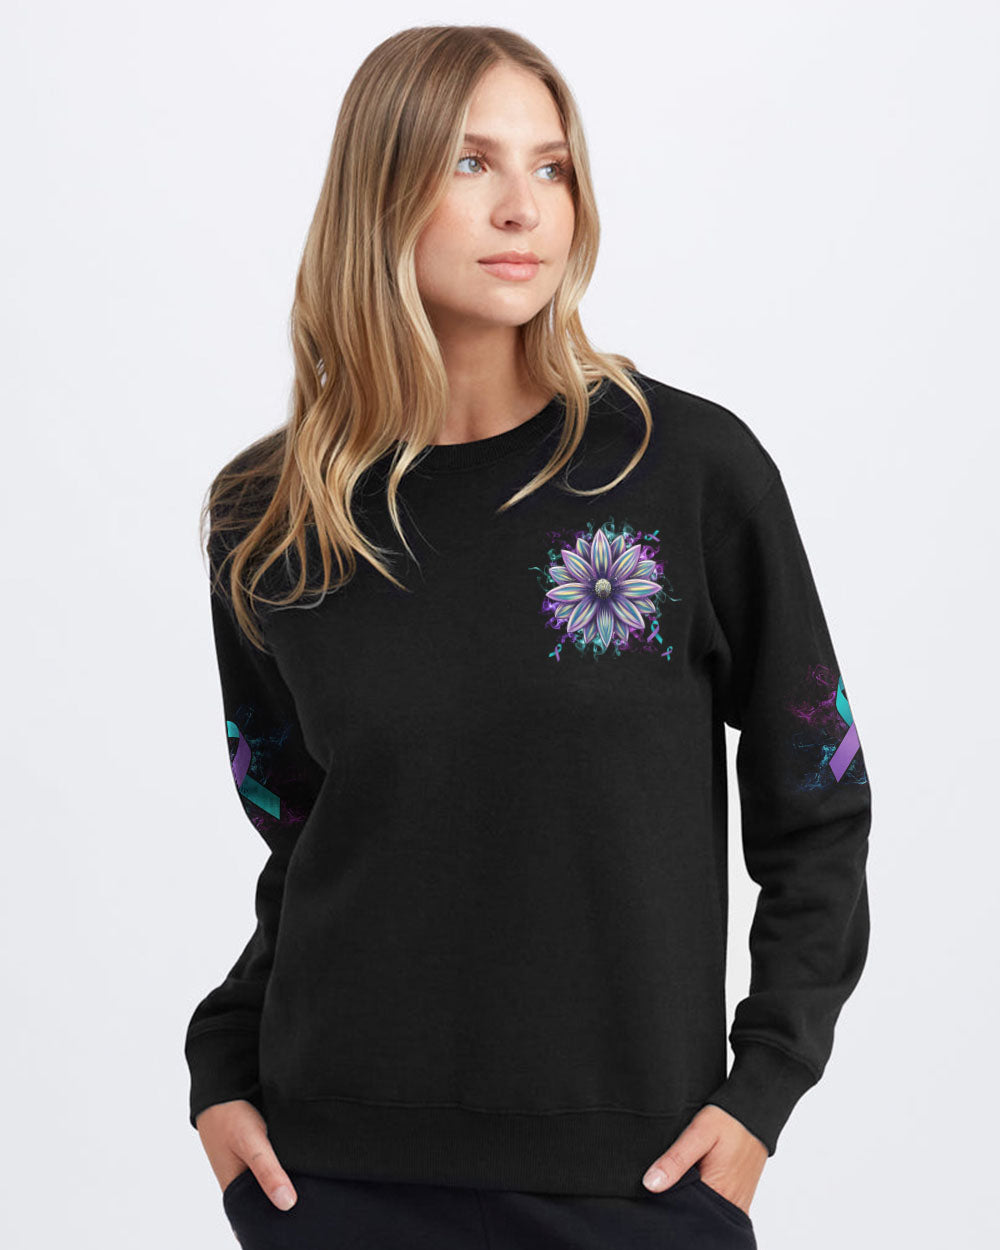 It's Okay If The Only Thing You Can Do Today Is Breathe Flower Women's Suicide Prevention Awareness Sweatshirt